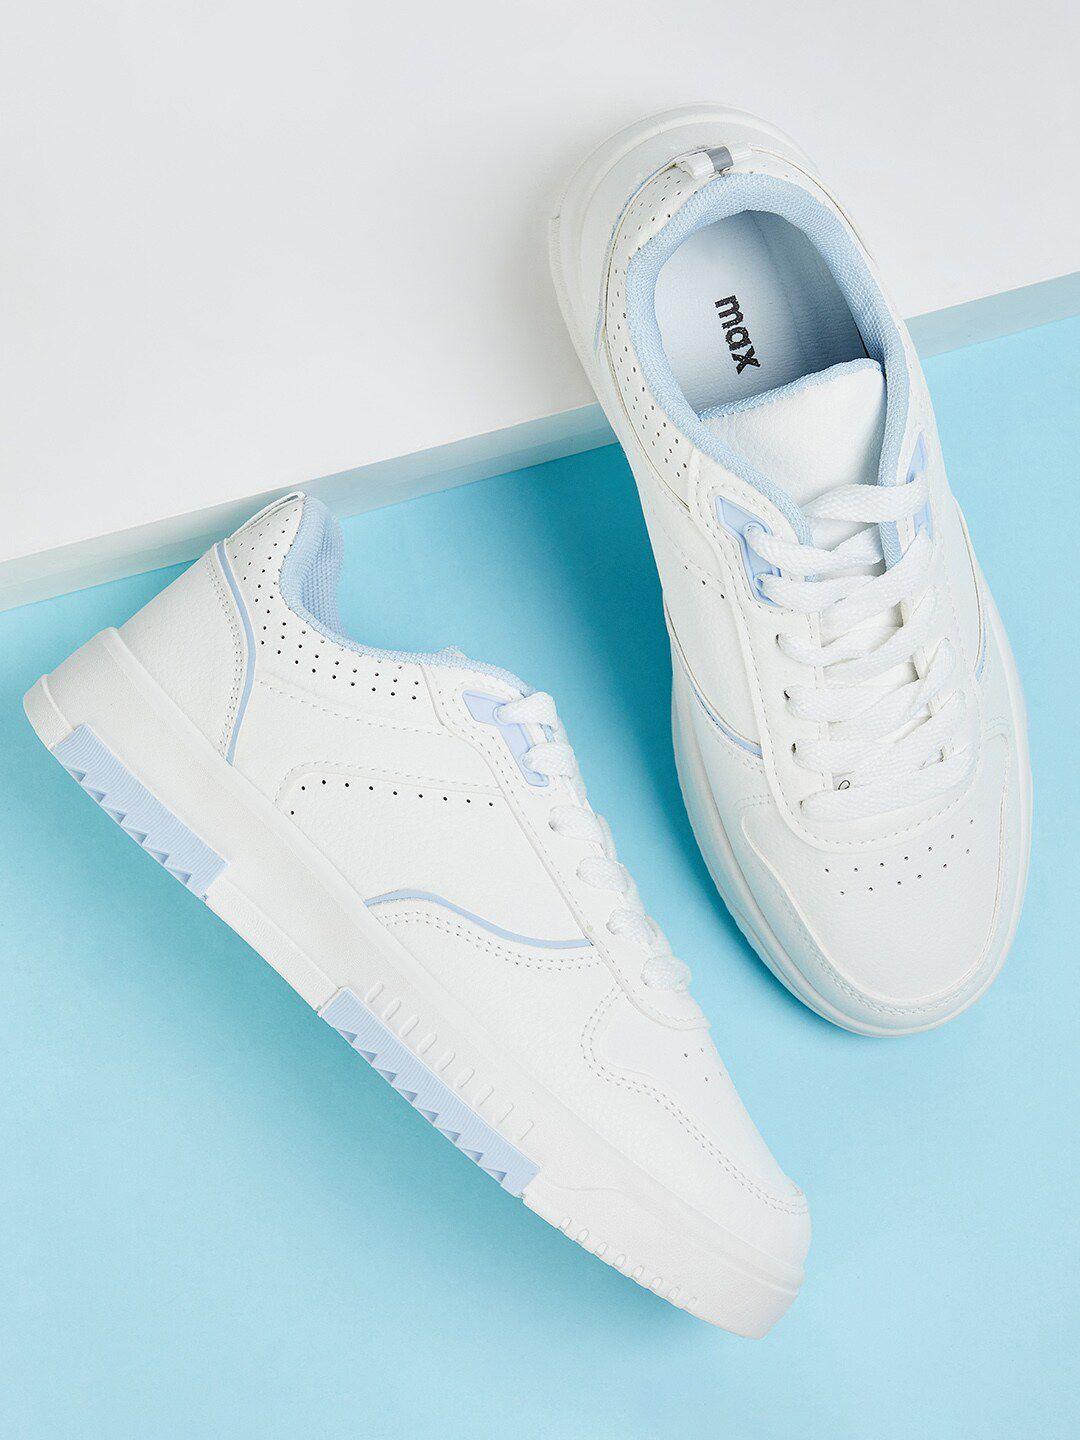 max-women-perforated-sneakers